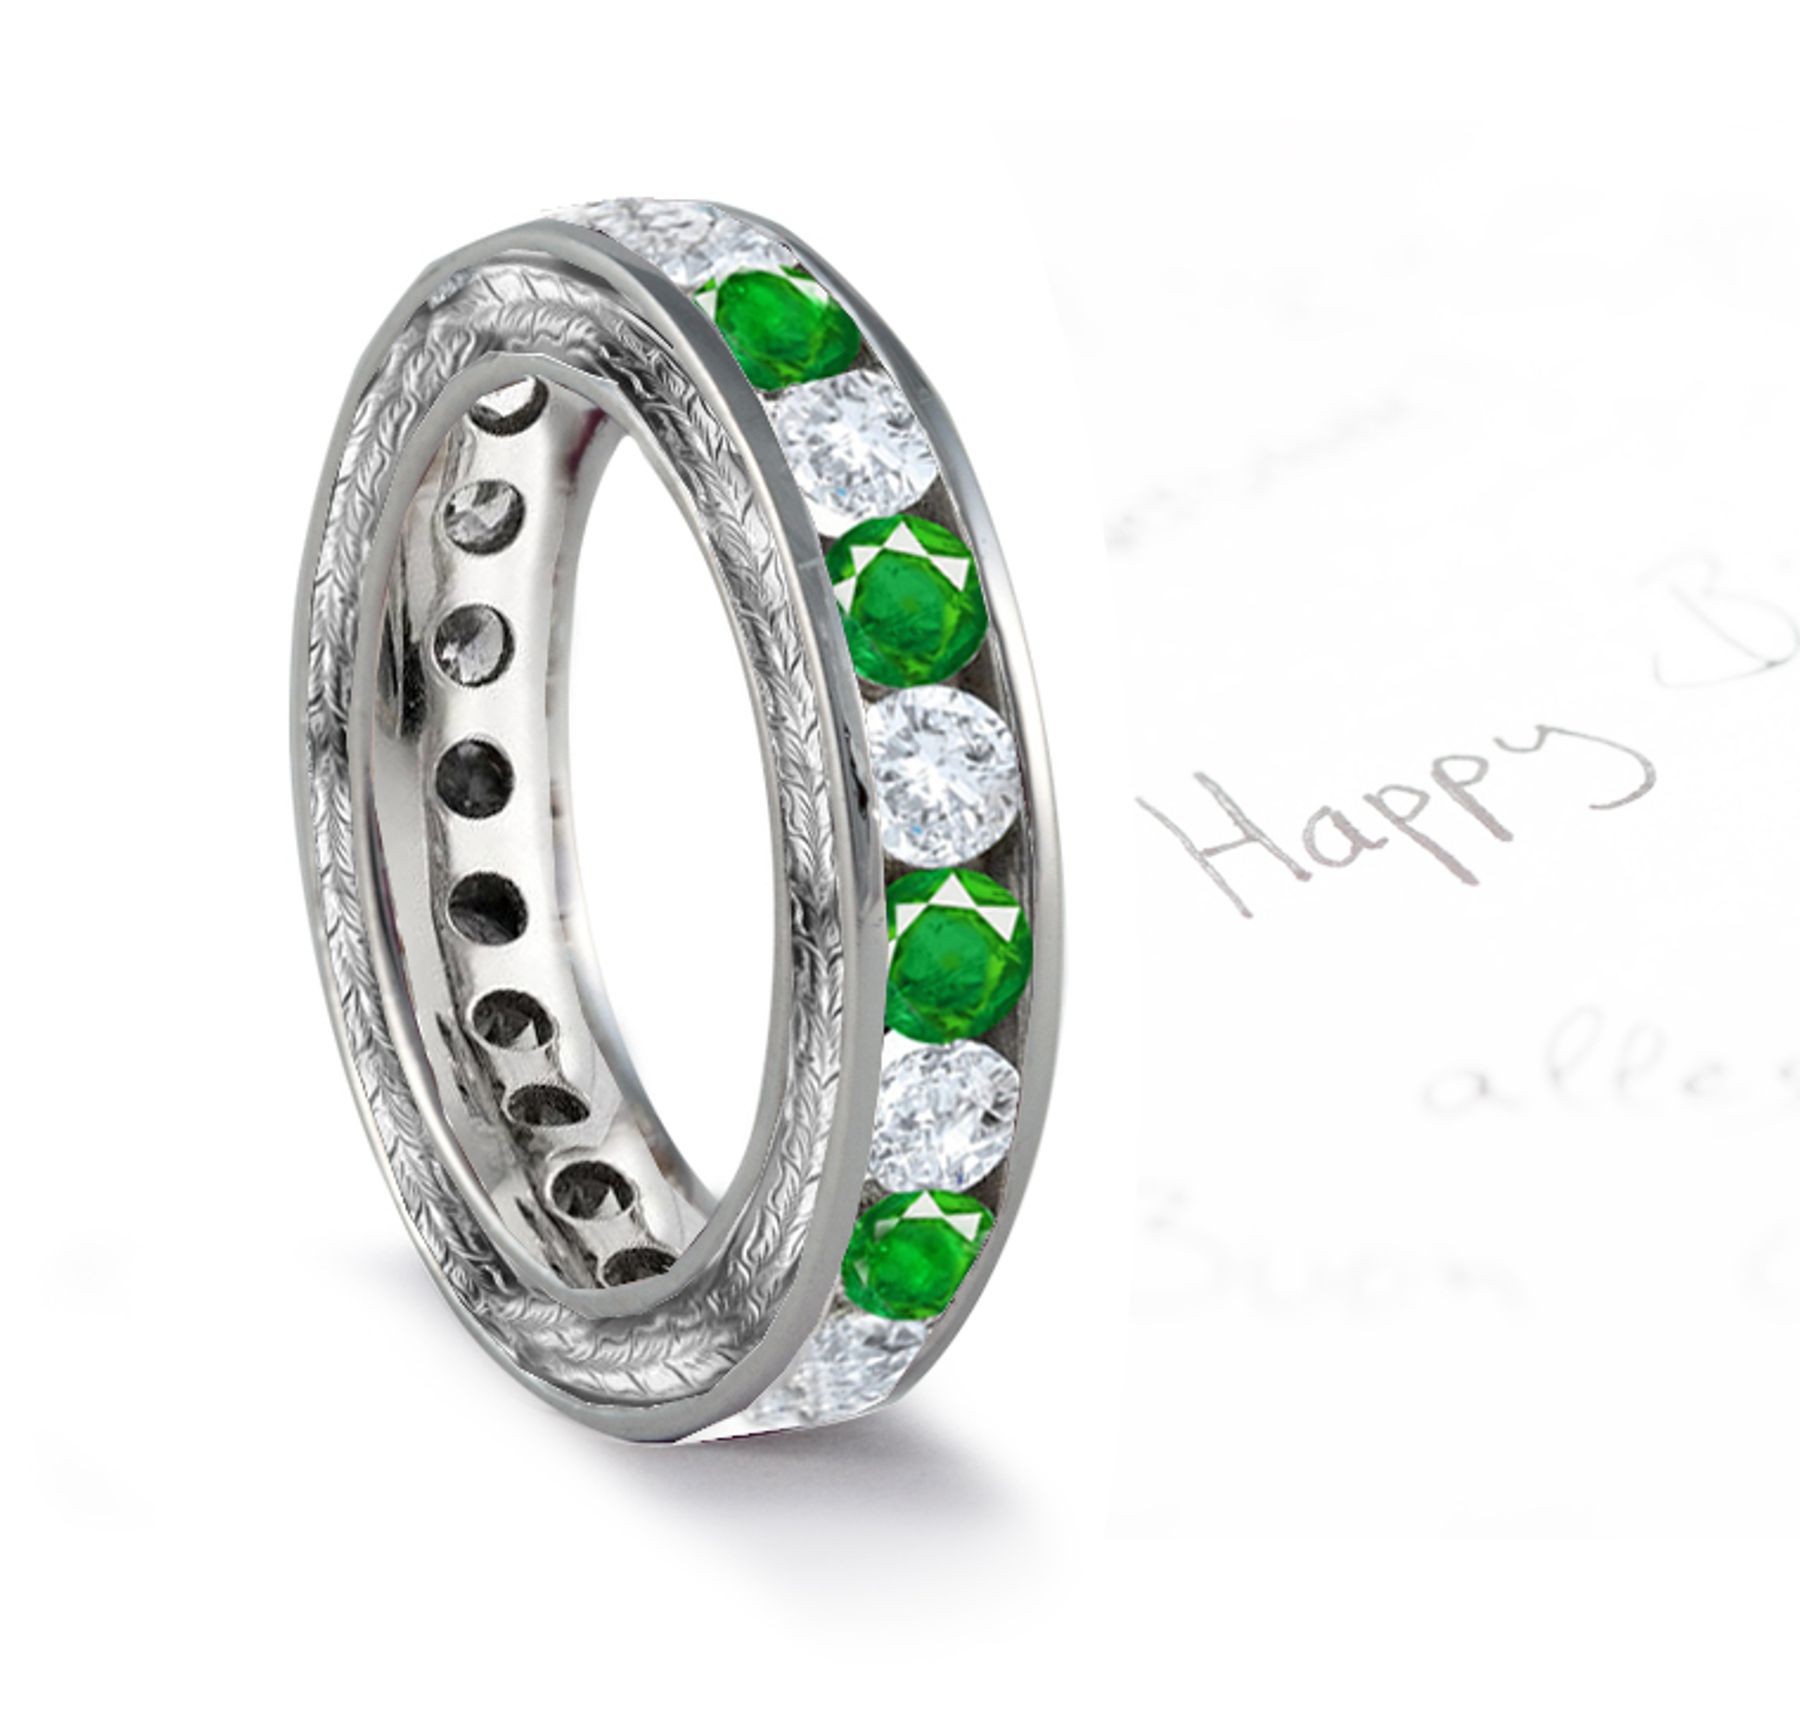 Distinguishing Marks: Victorian Diamond & Emerald Anniversary Band in Gold with Foliate Scrolls & Motifs in Exclusive Designs